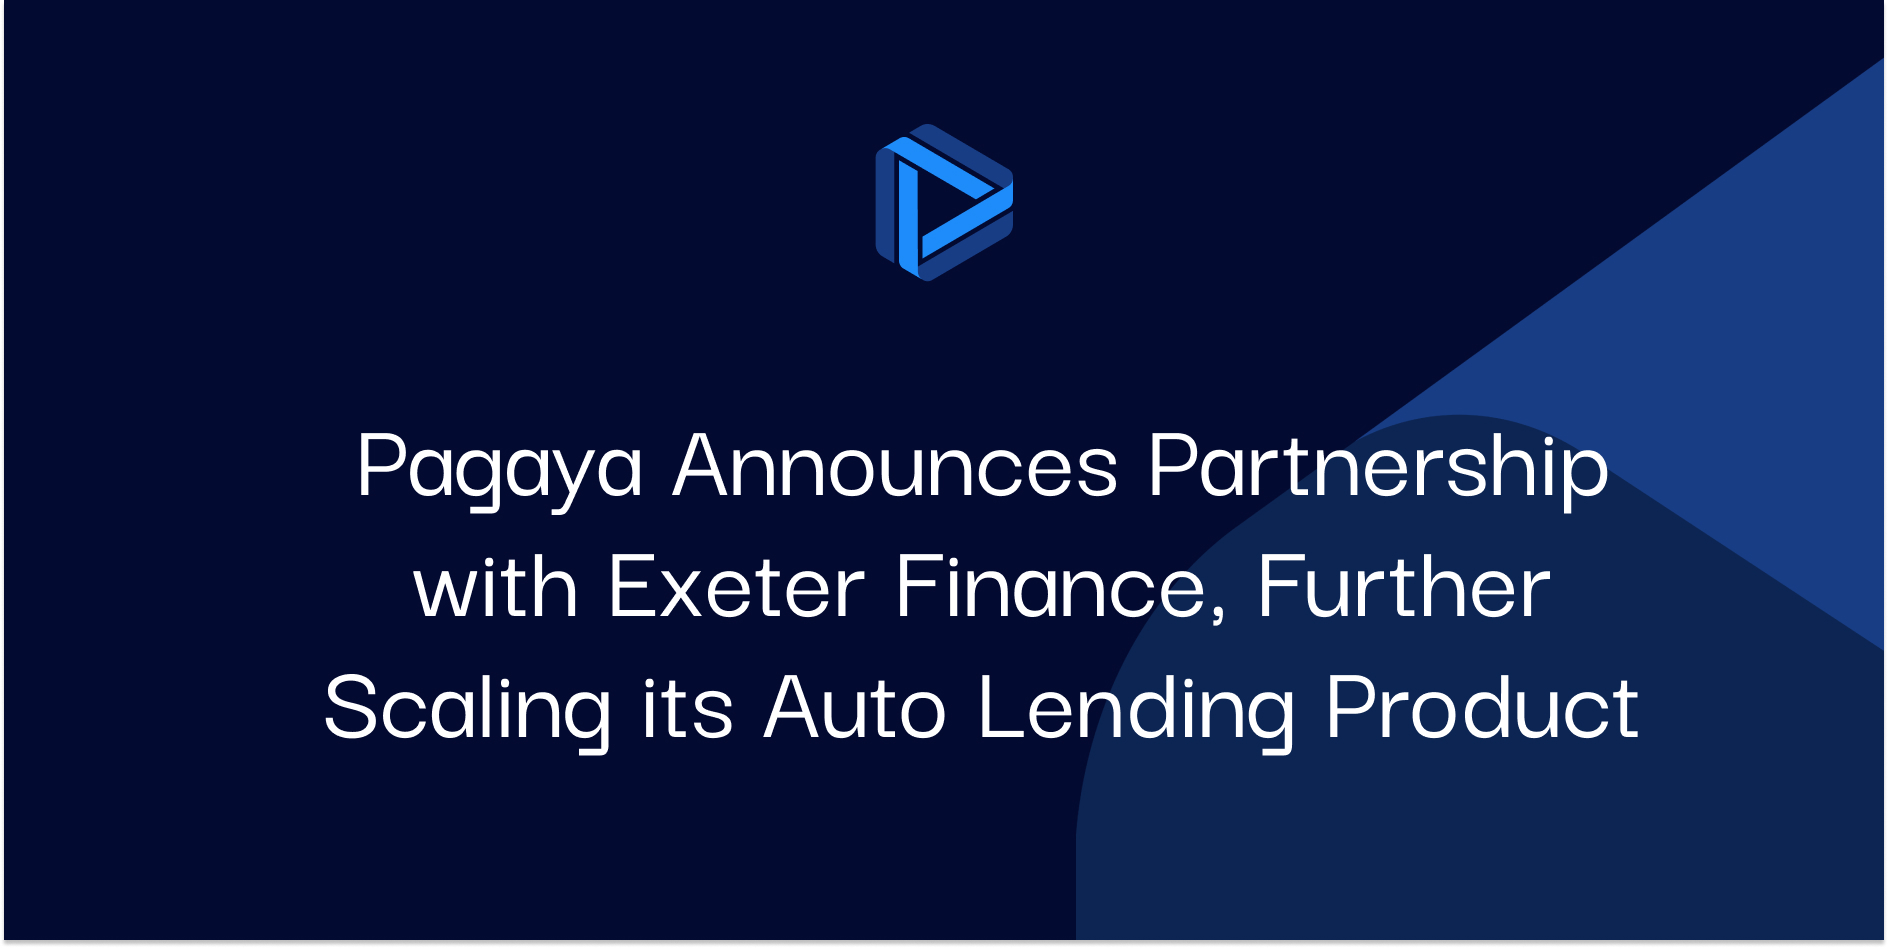 Pagaya Announces Partnership with Exeter Finance, Further Scaling its Auto Lending Product